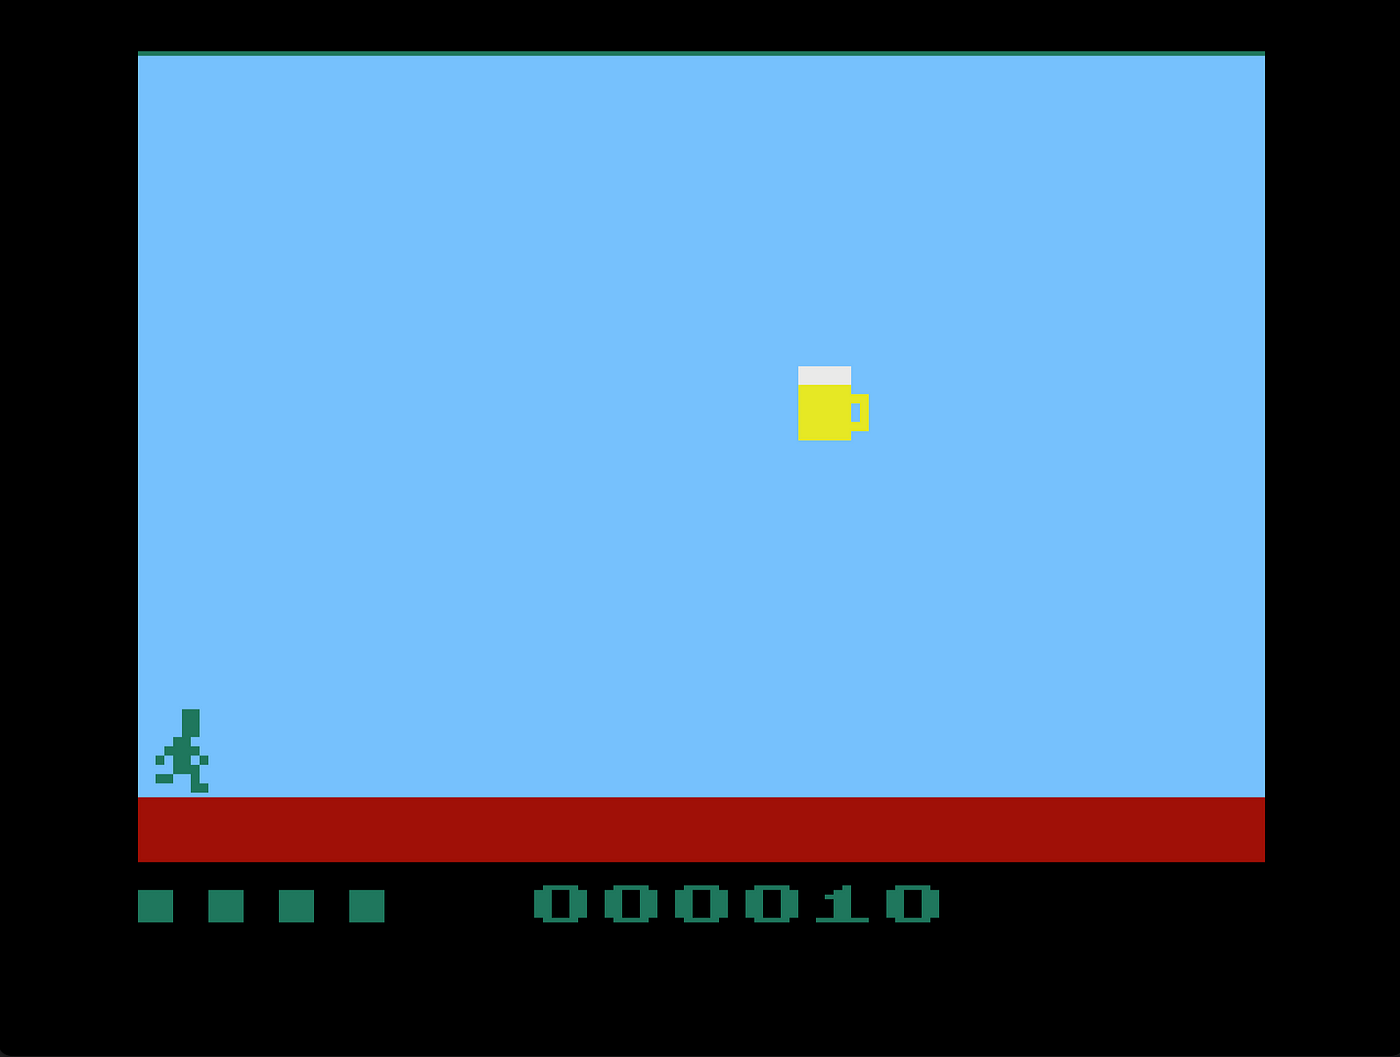 Creating a game for Atari 2600 in 2022